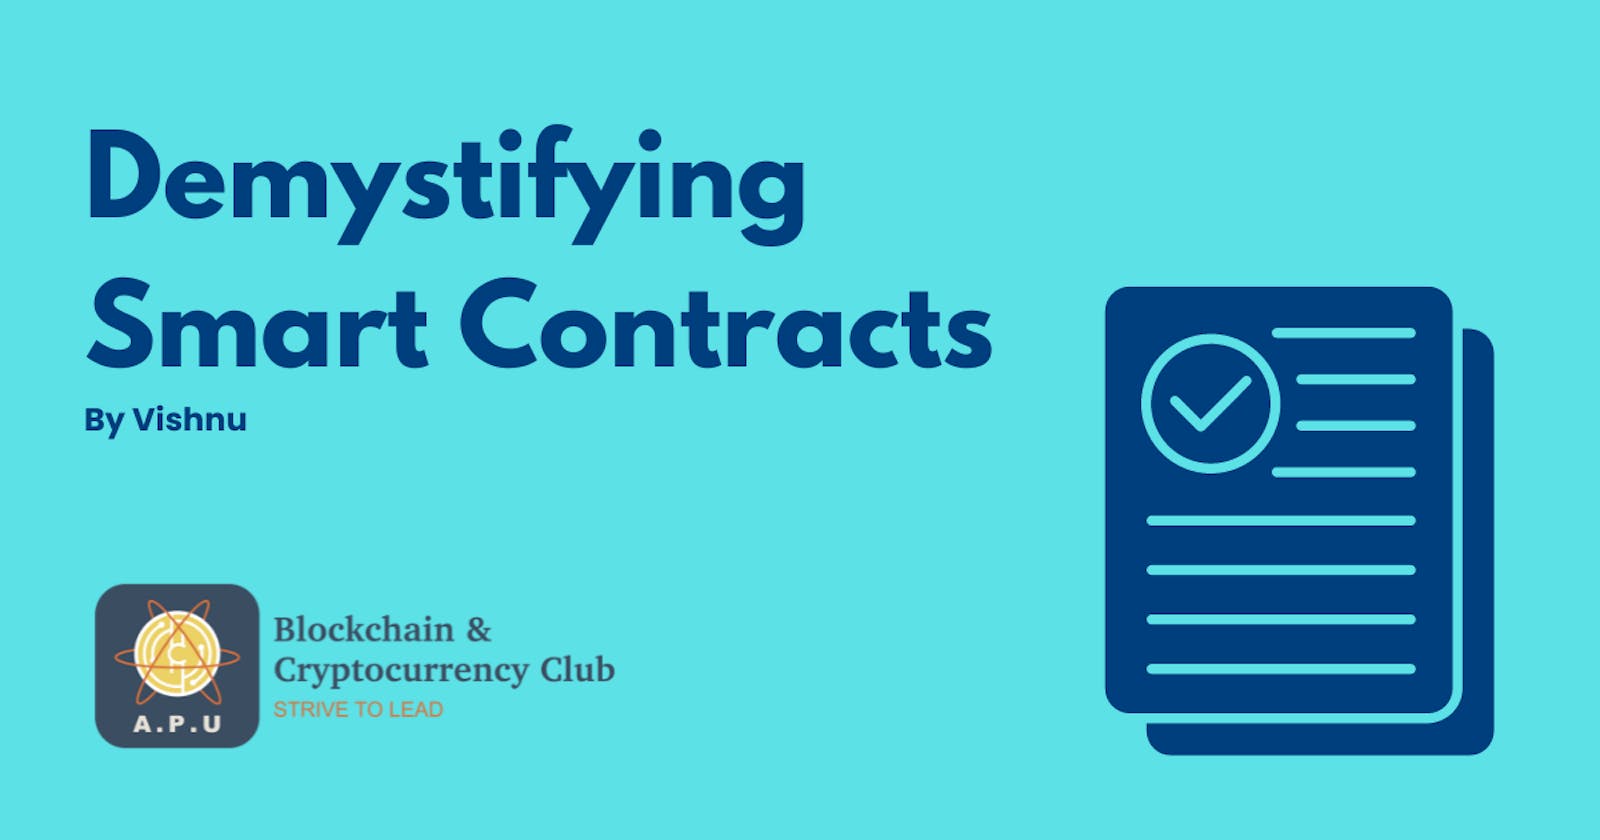 Demystifying Smart Contracts